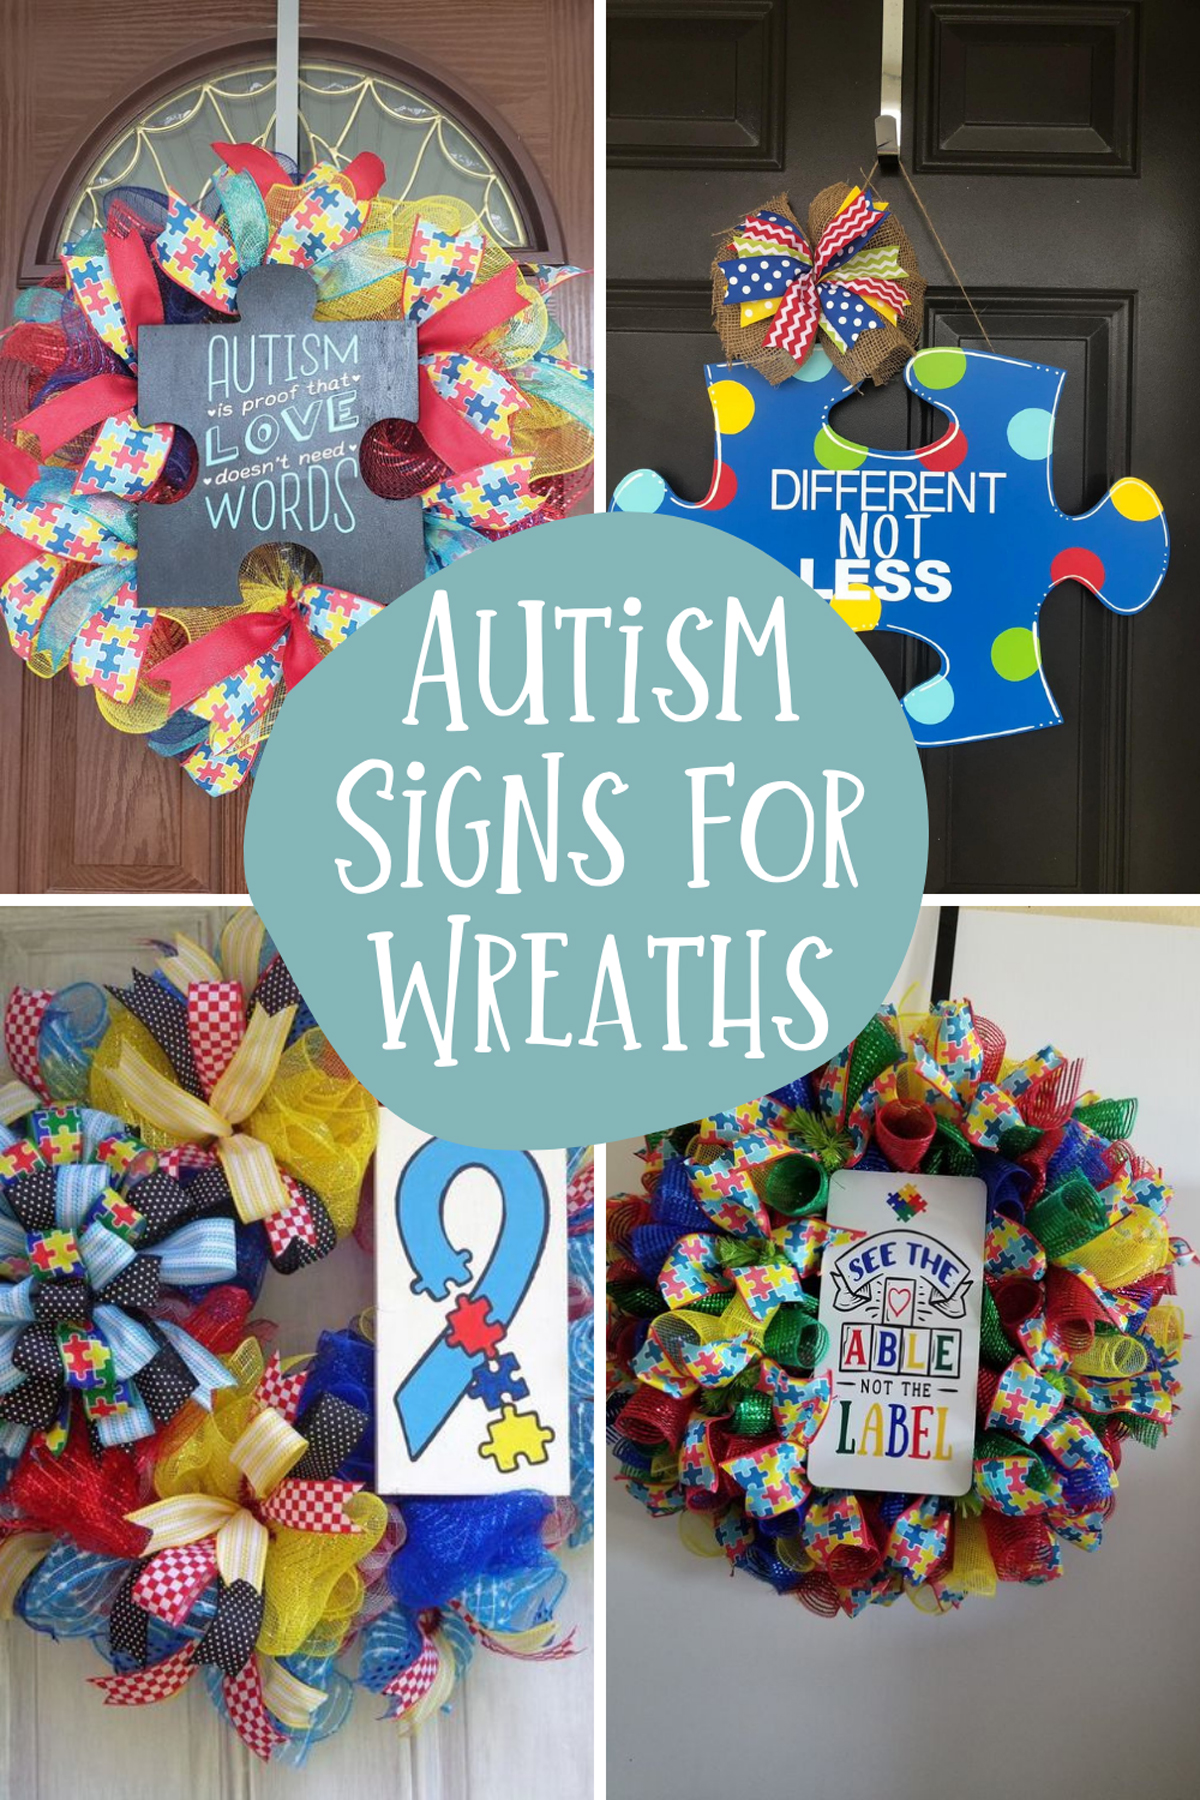 Autism Signs for Wreaths